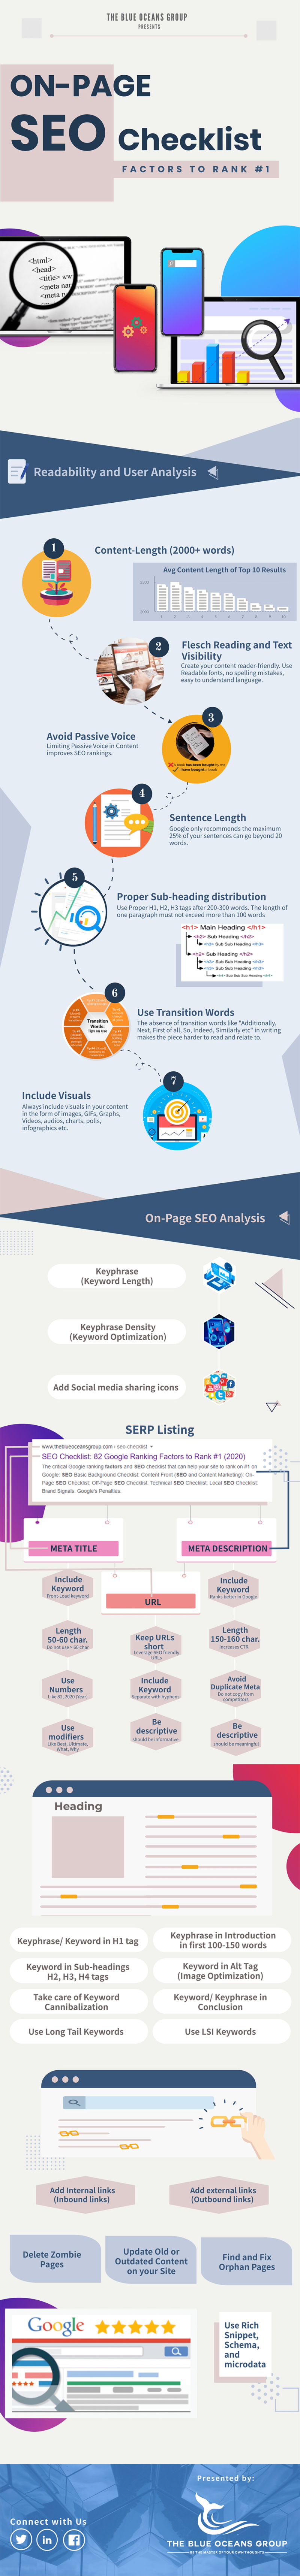 Infographic about on-page SEO